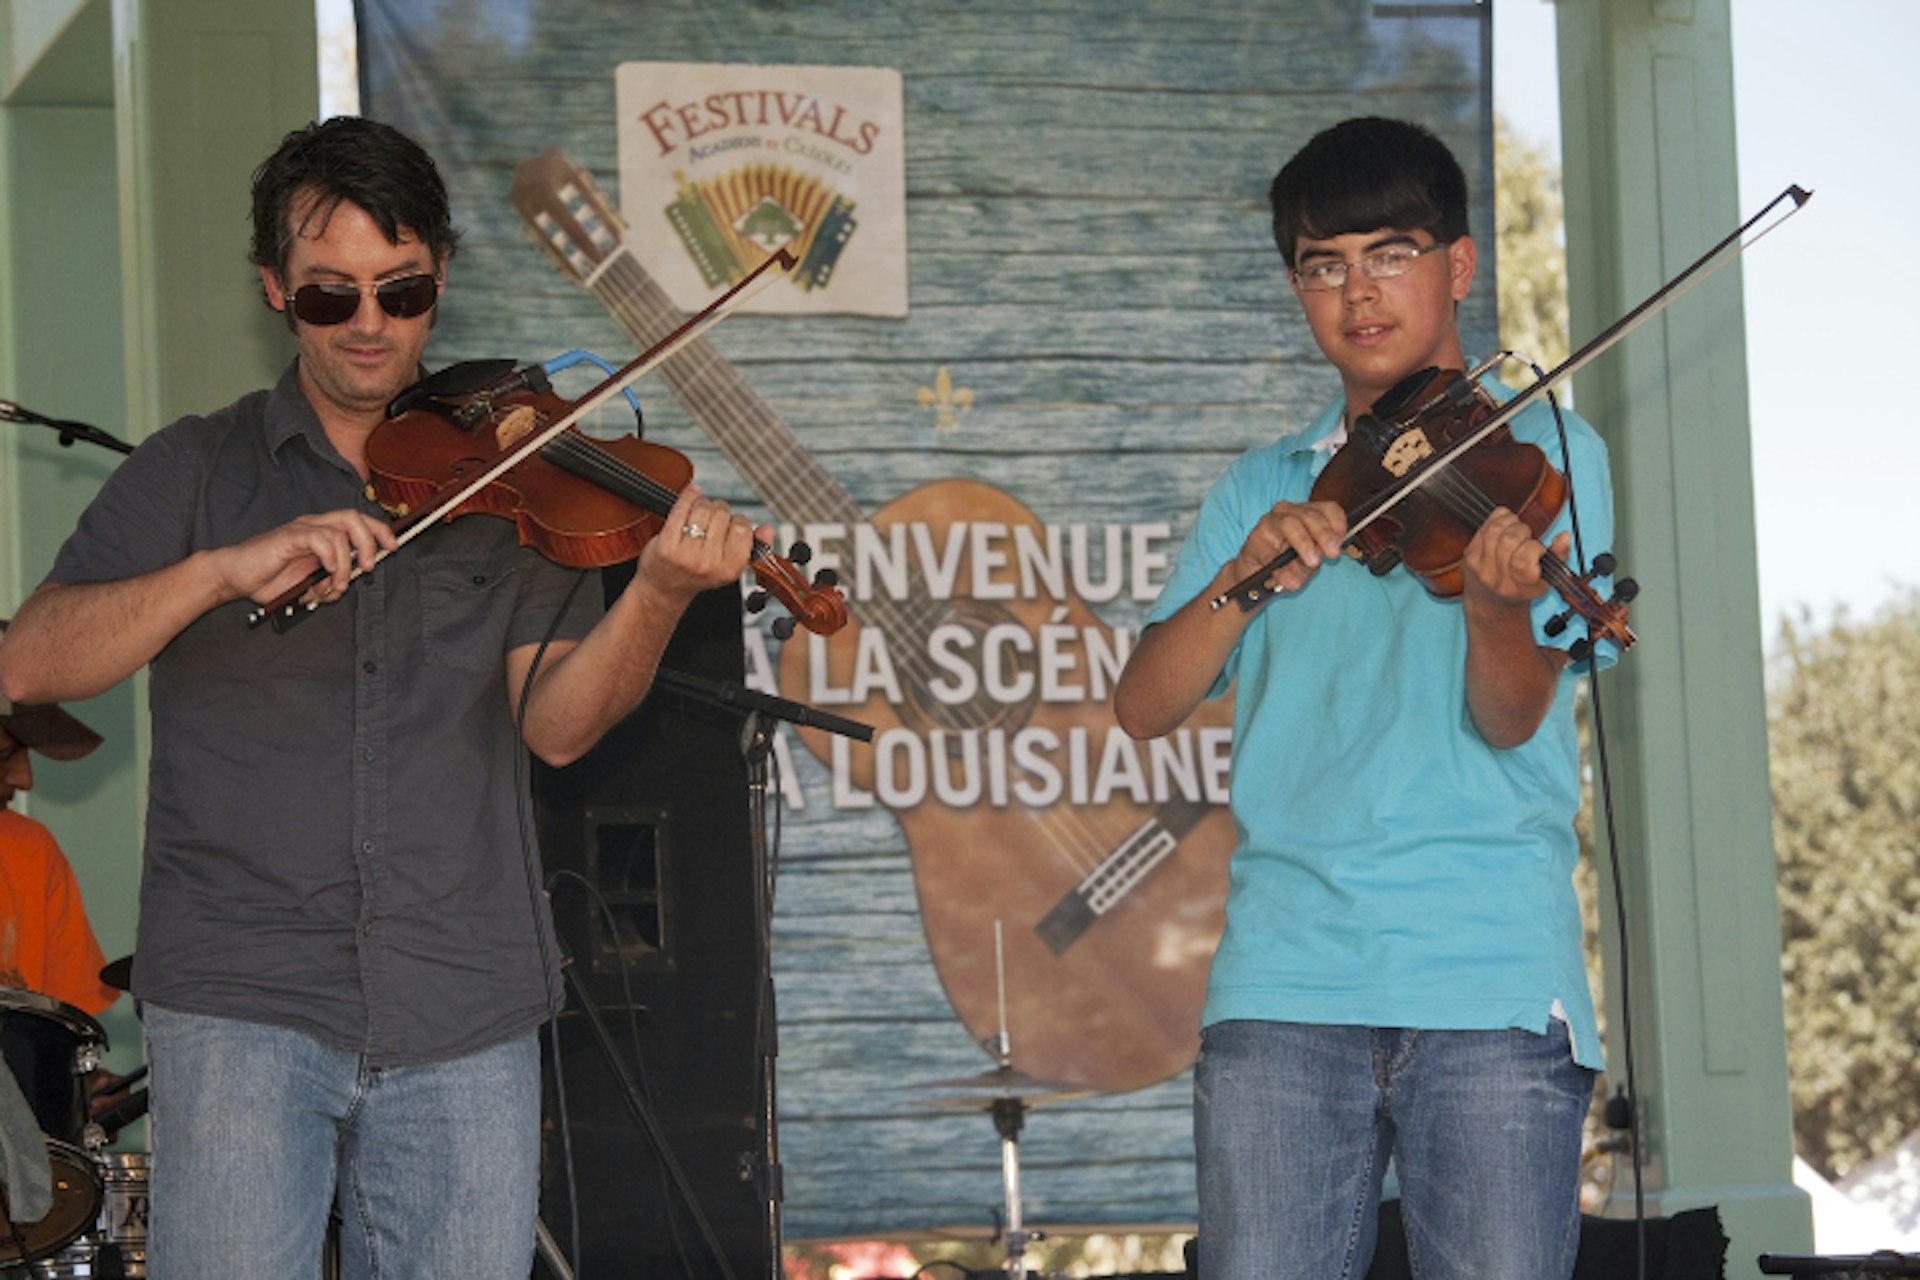 Cajun fiddles playing at the Festivals Acadiens et Creoles. Image by Judy Bellah / Lonely Planet Images / Getty Images